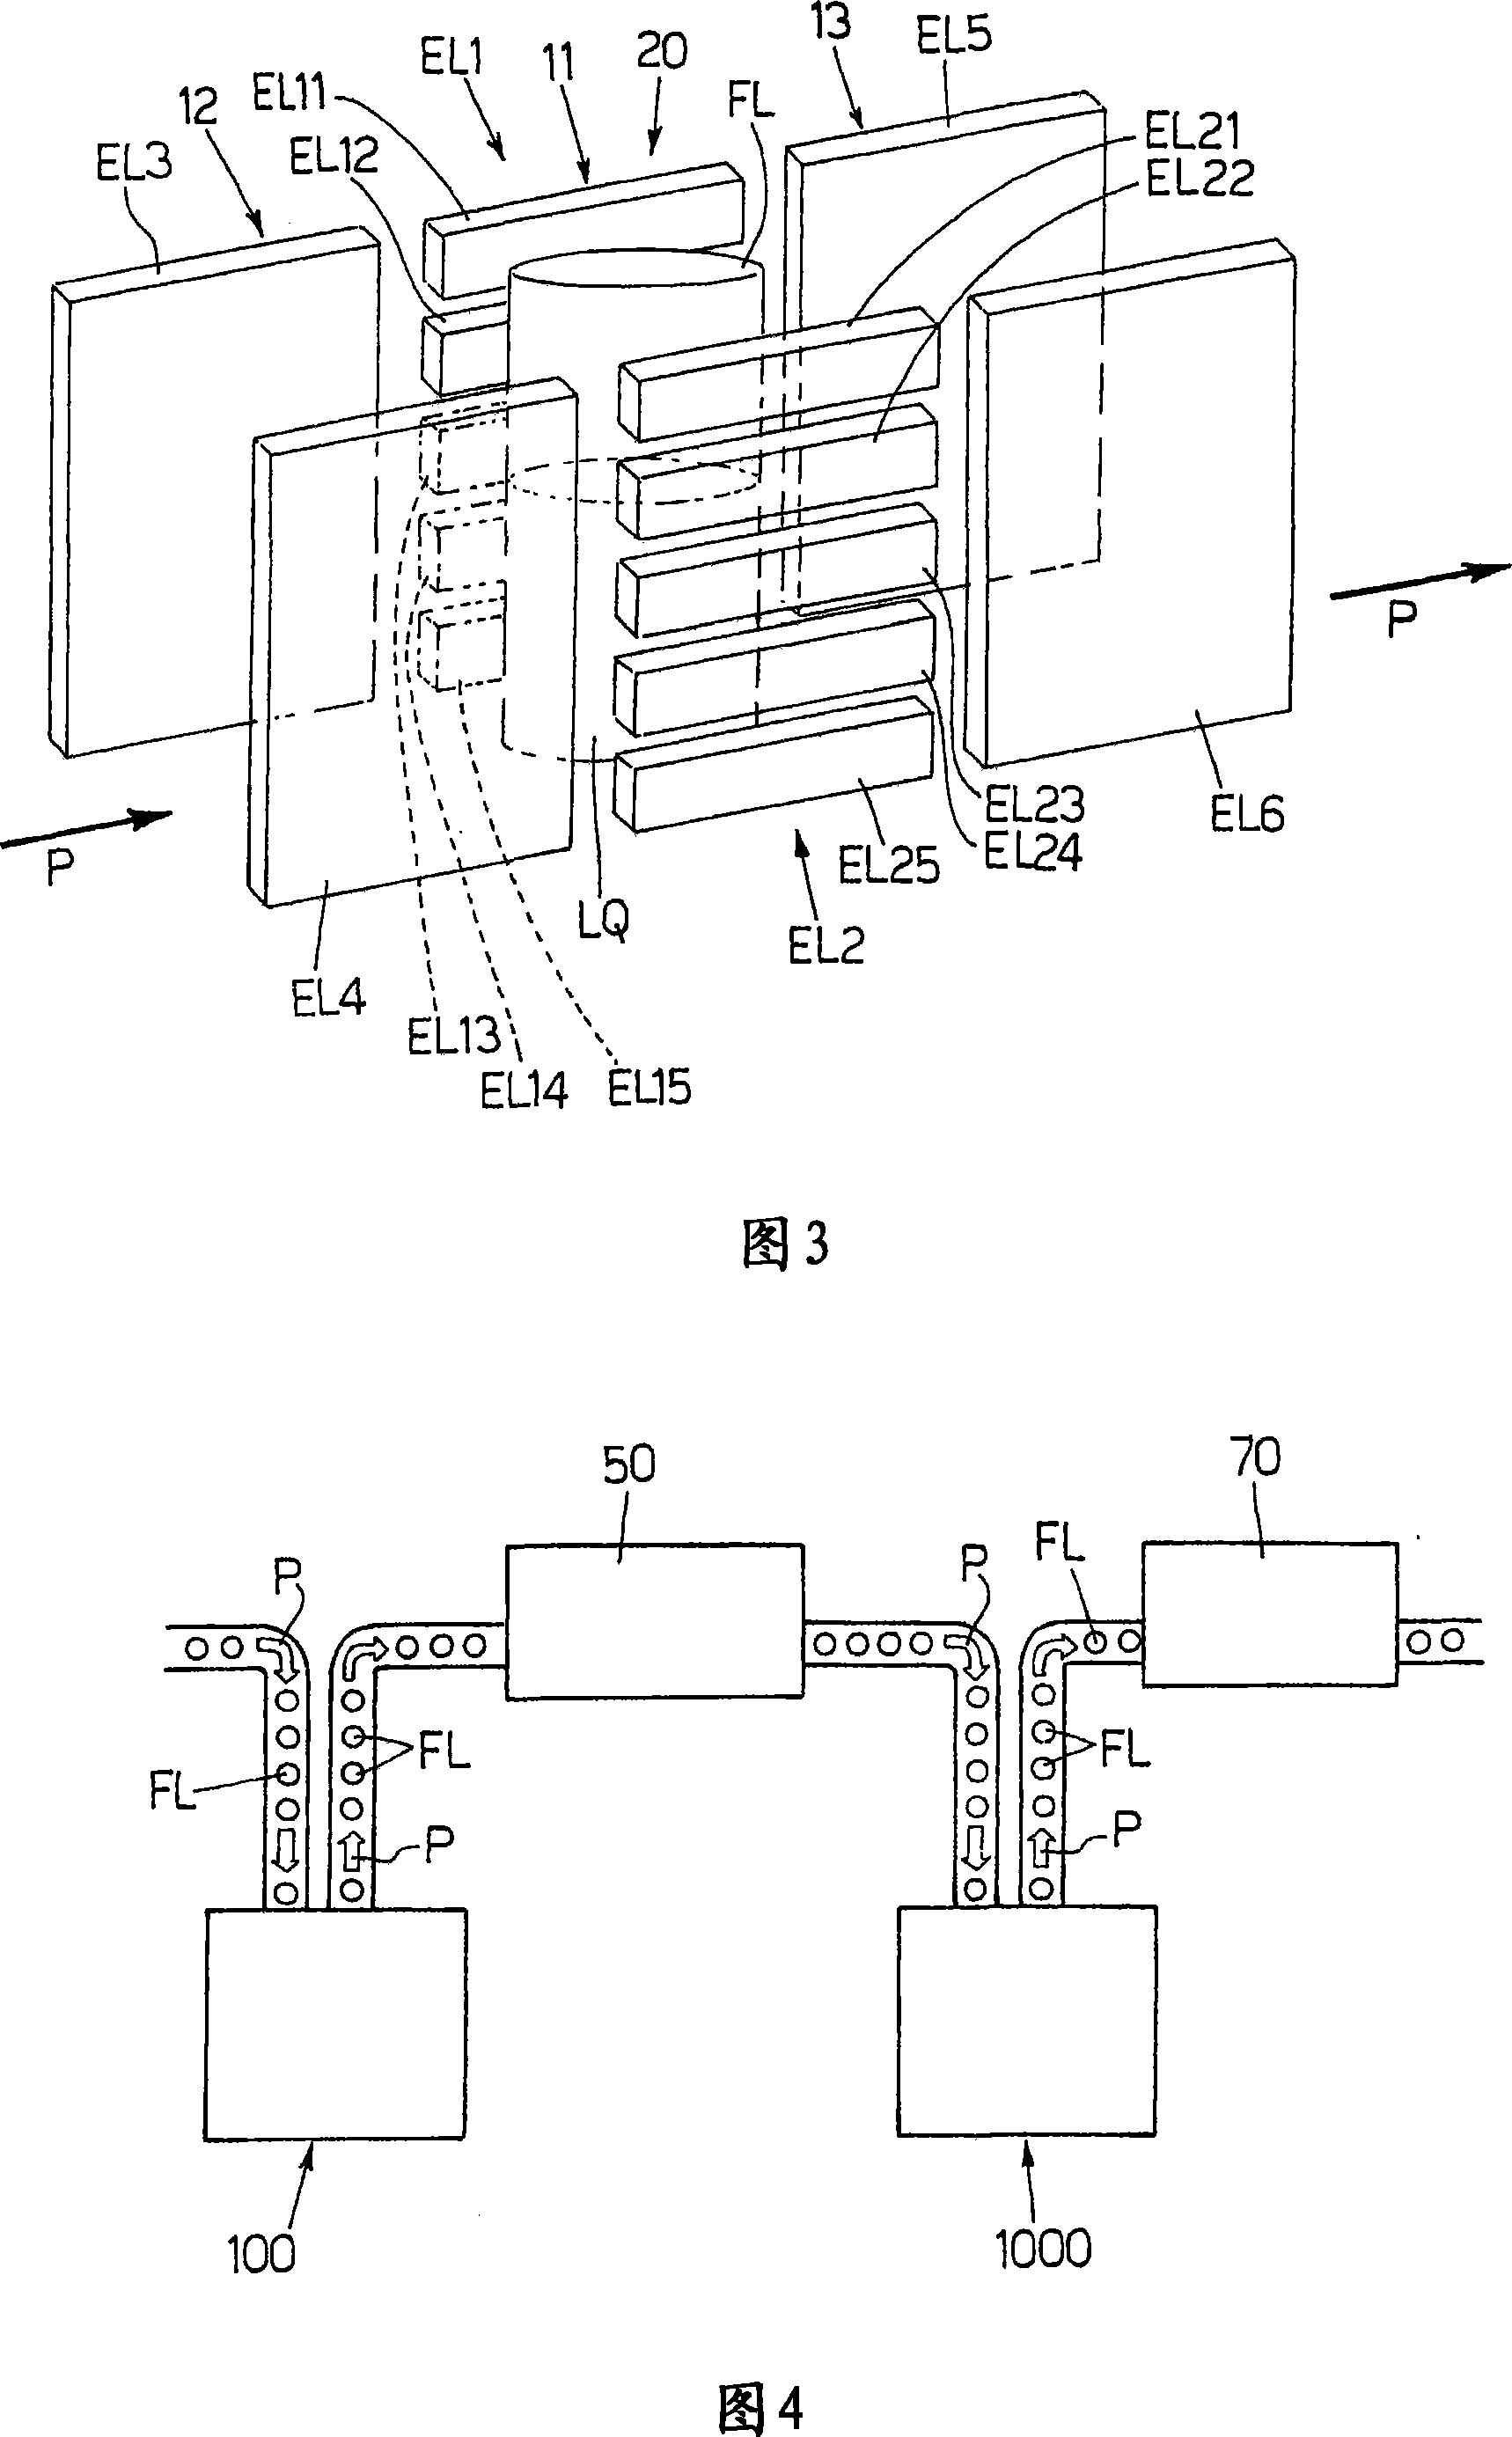 Apparatus for weighing liquid in a bottle, in particular a pharmaceutical bottle